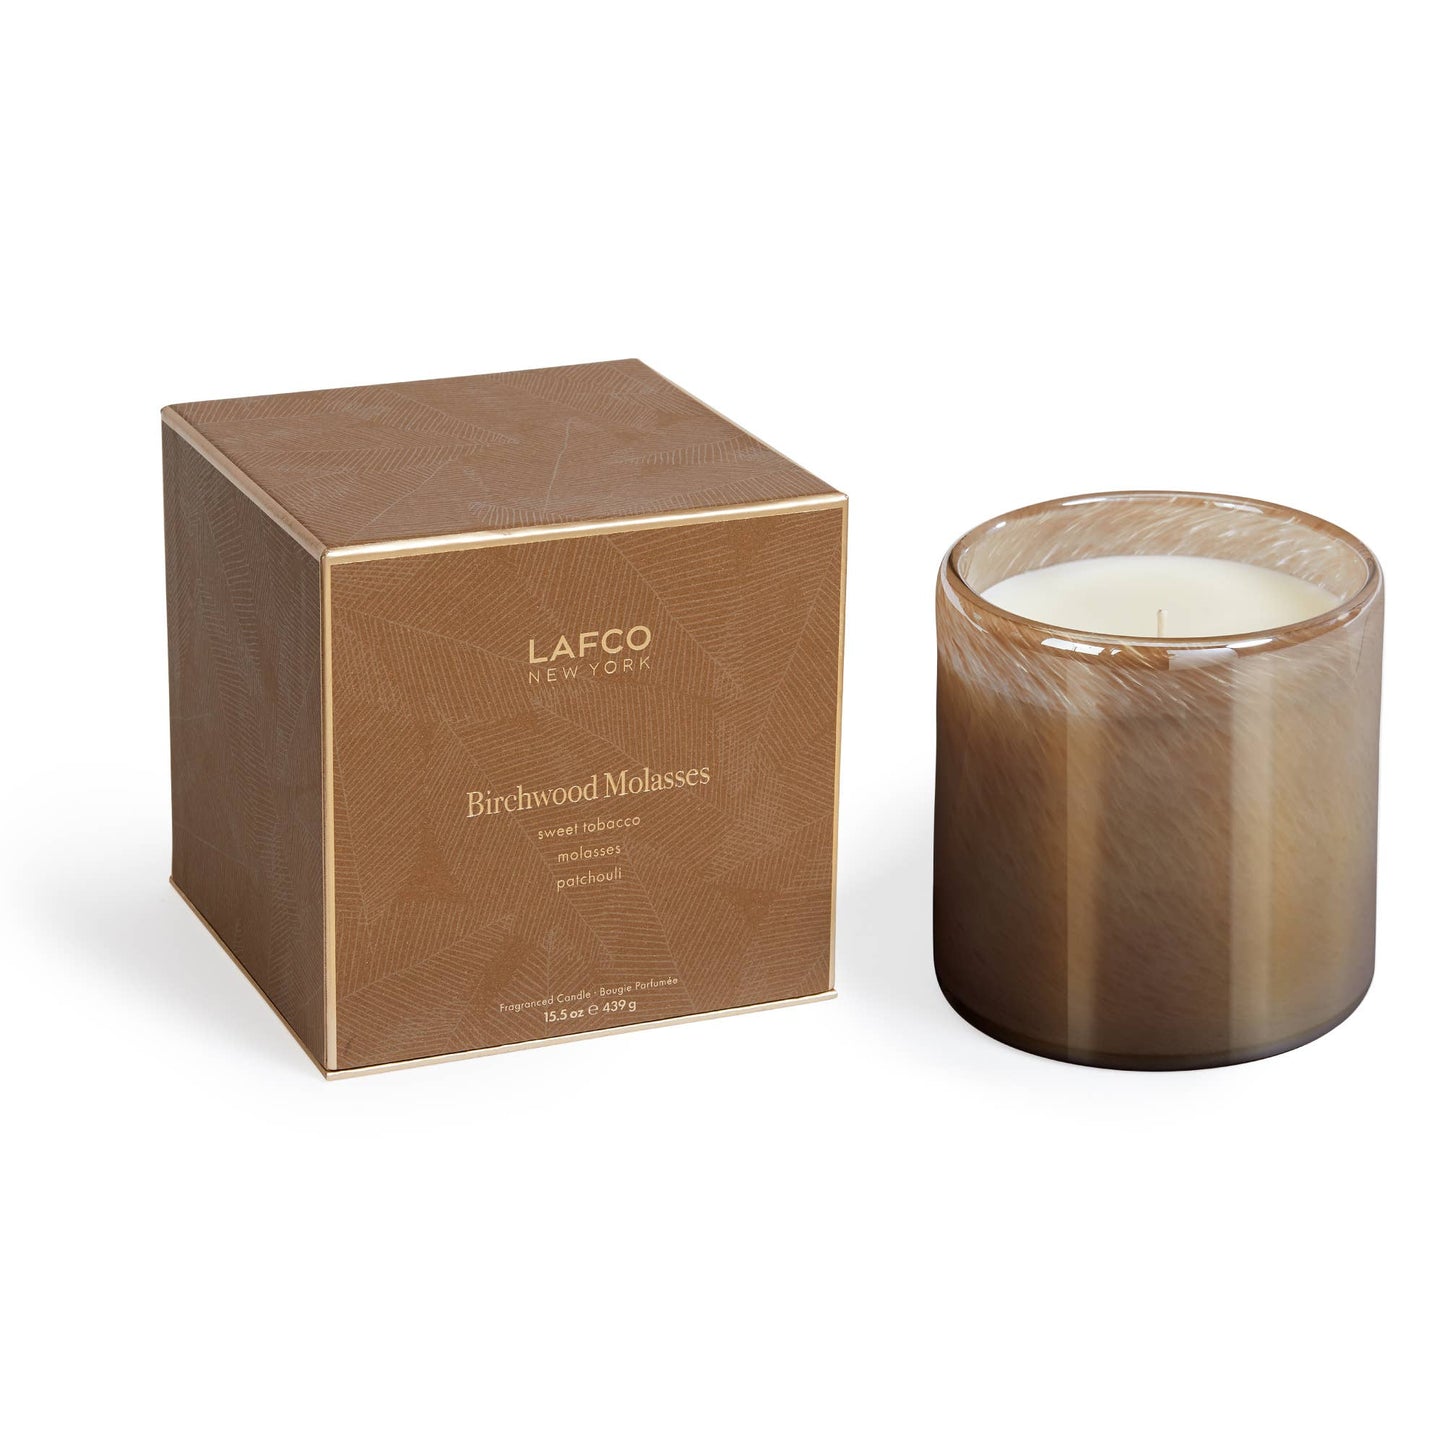 LAFCO Birchwood Molasses Scented Candle